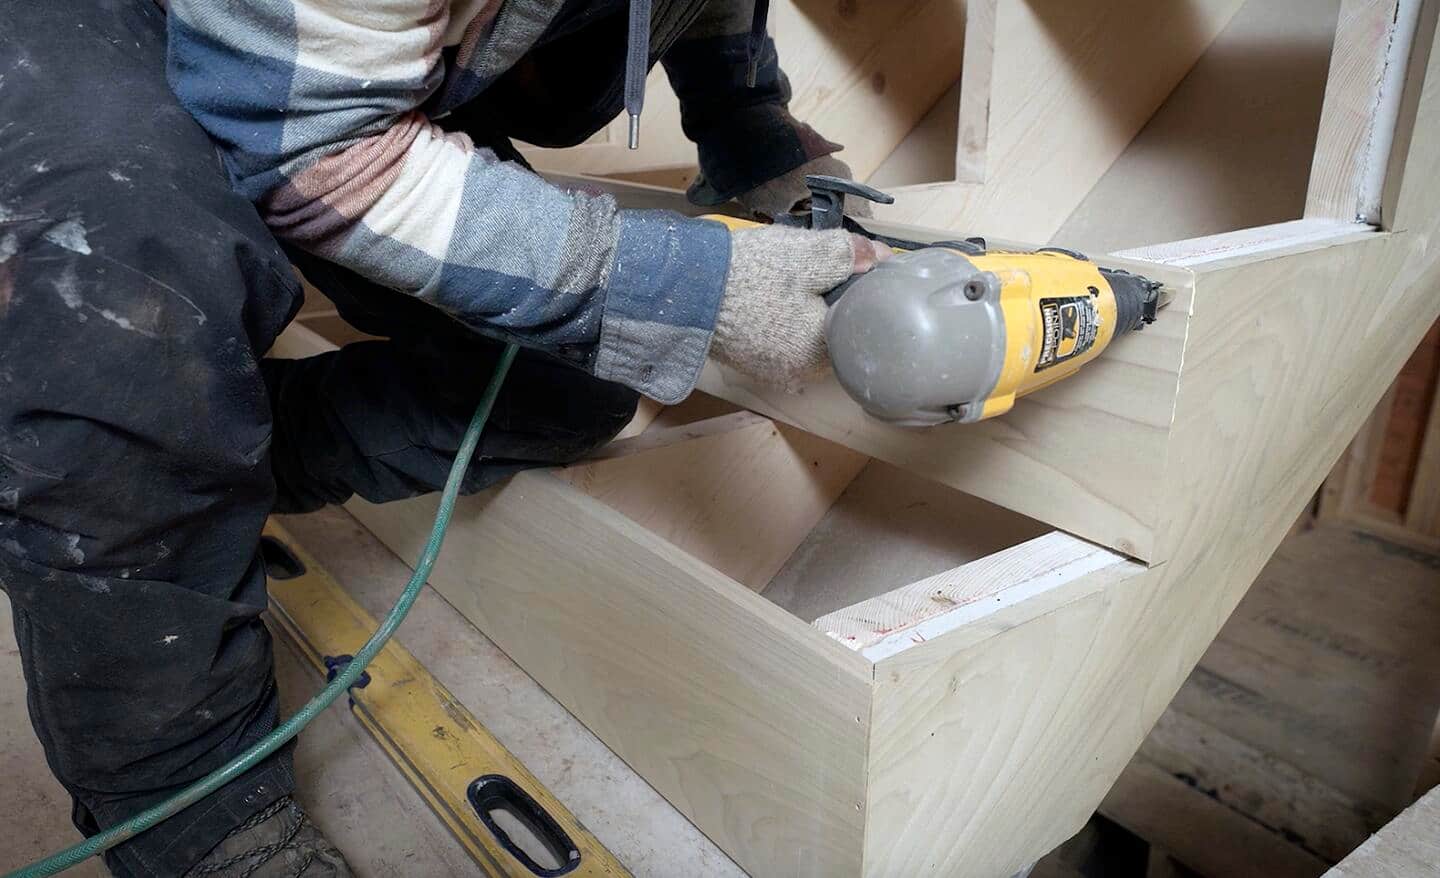 A worker fastens stair riser boards into place with a pneumatic nail gun.